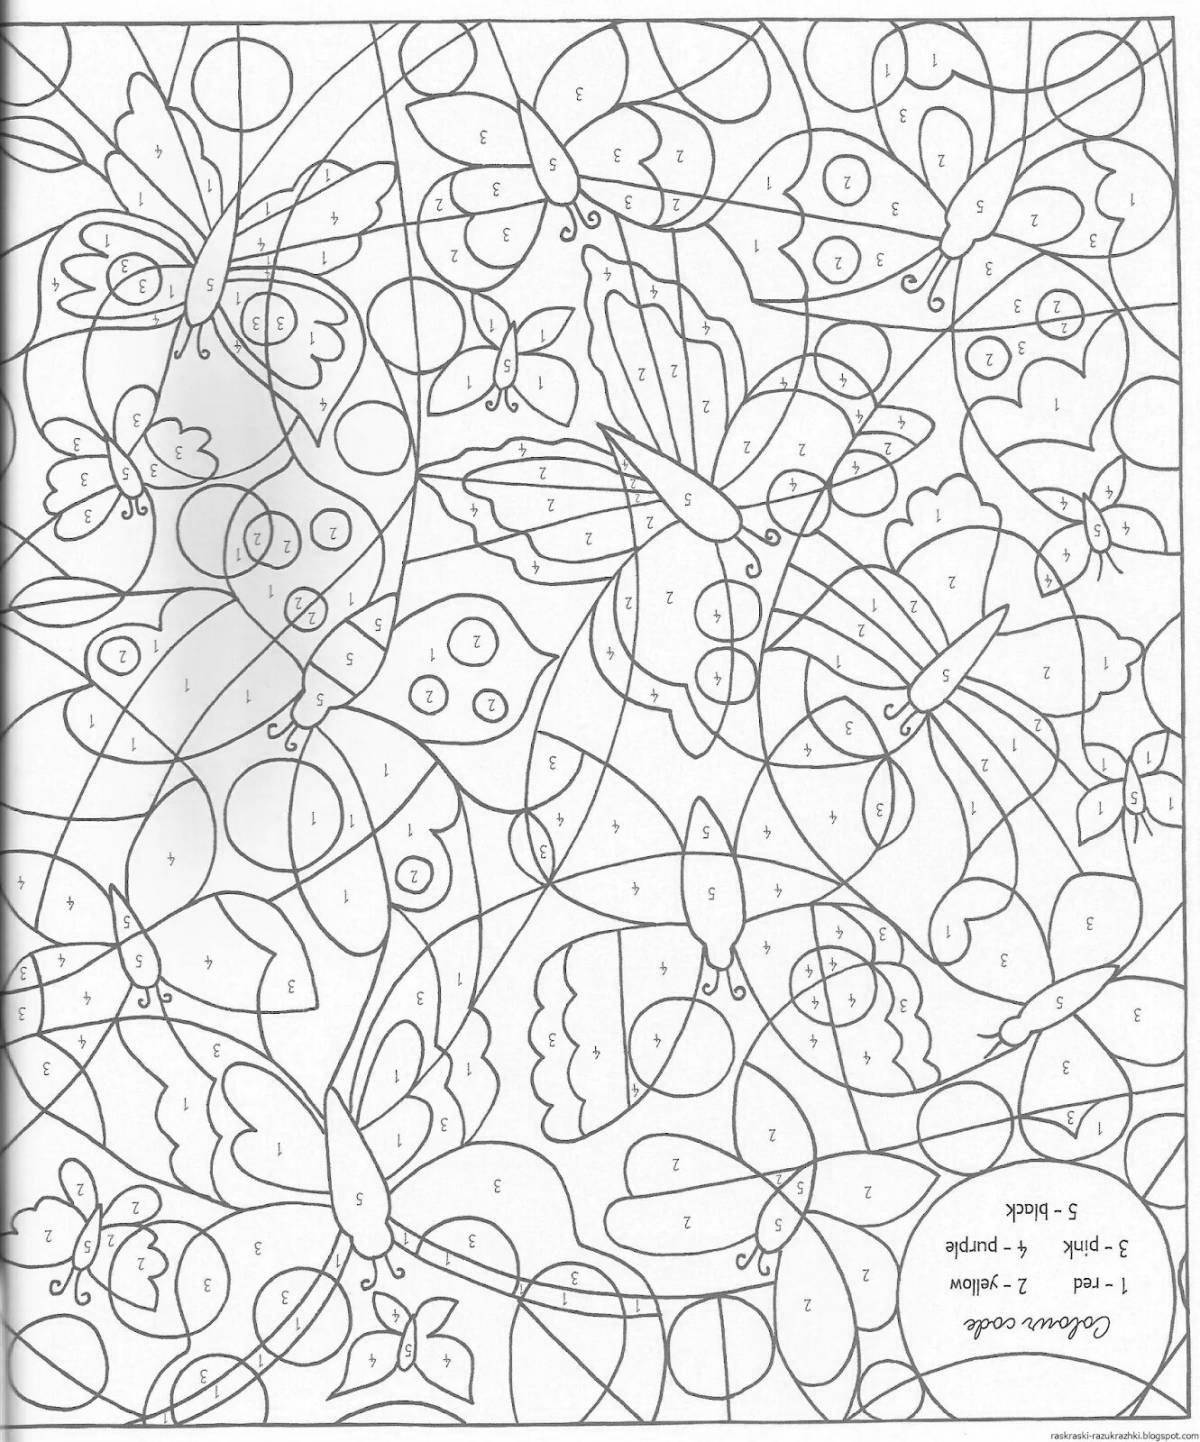 Fun coloring book for 7-8 year olds